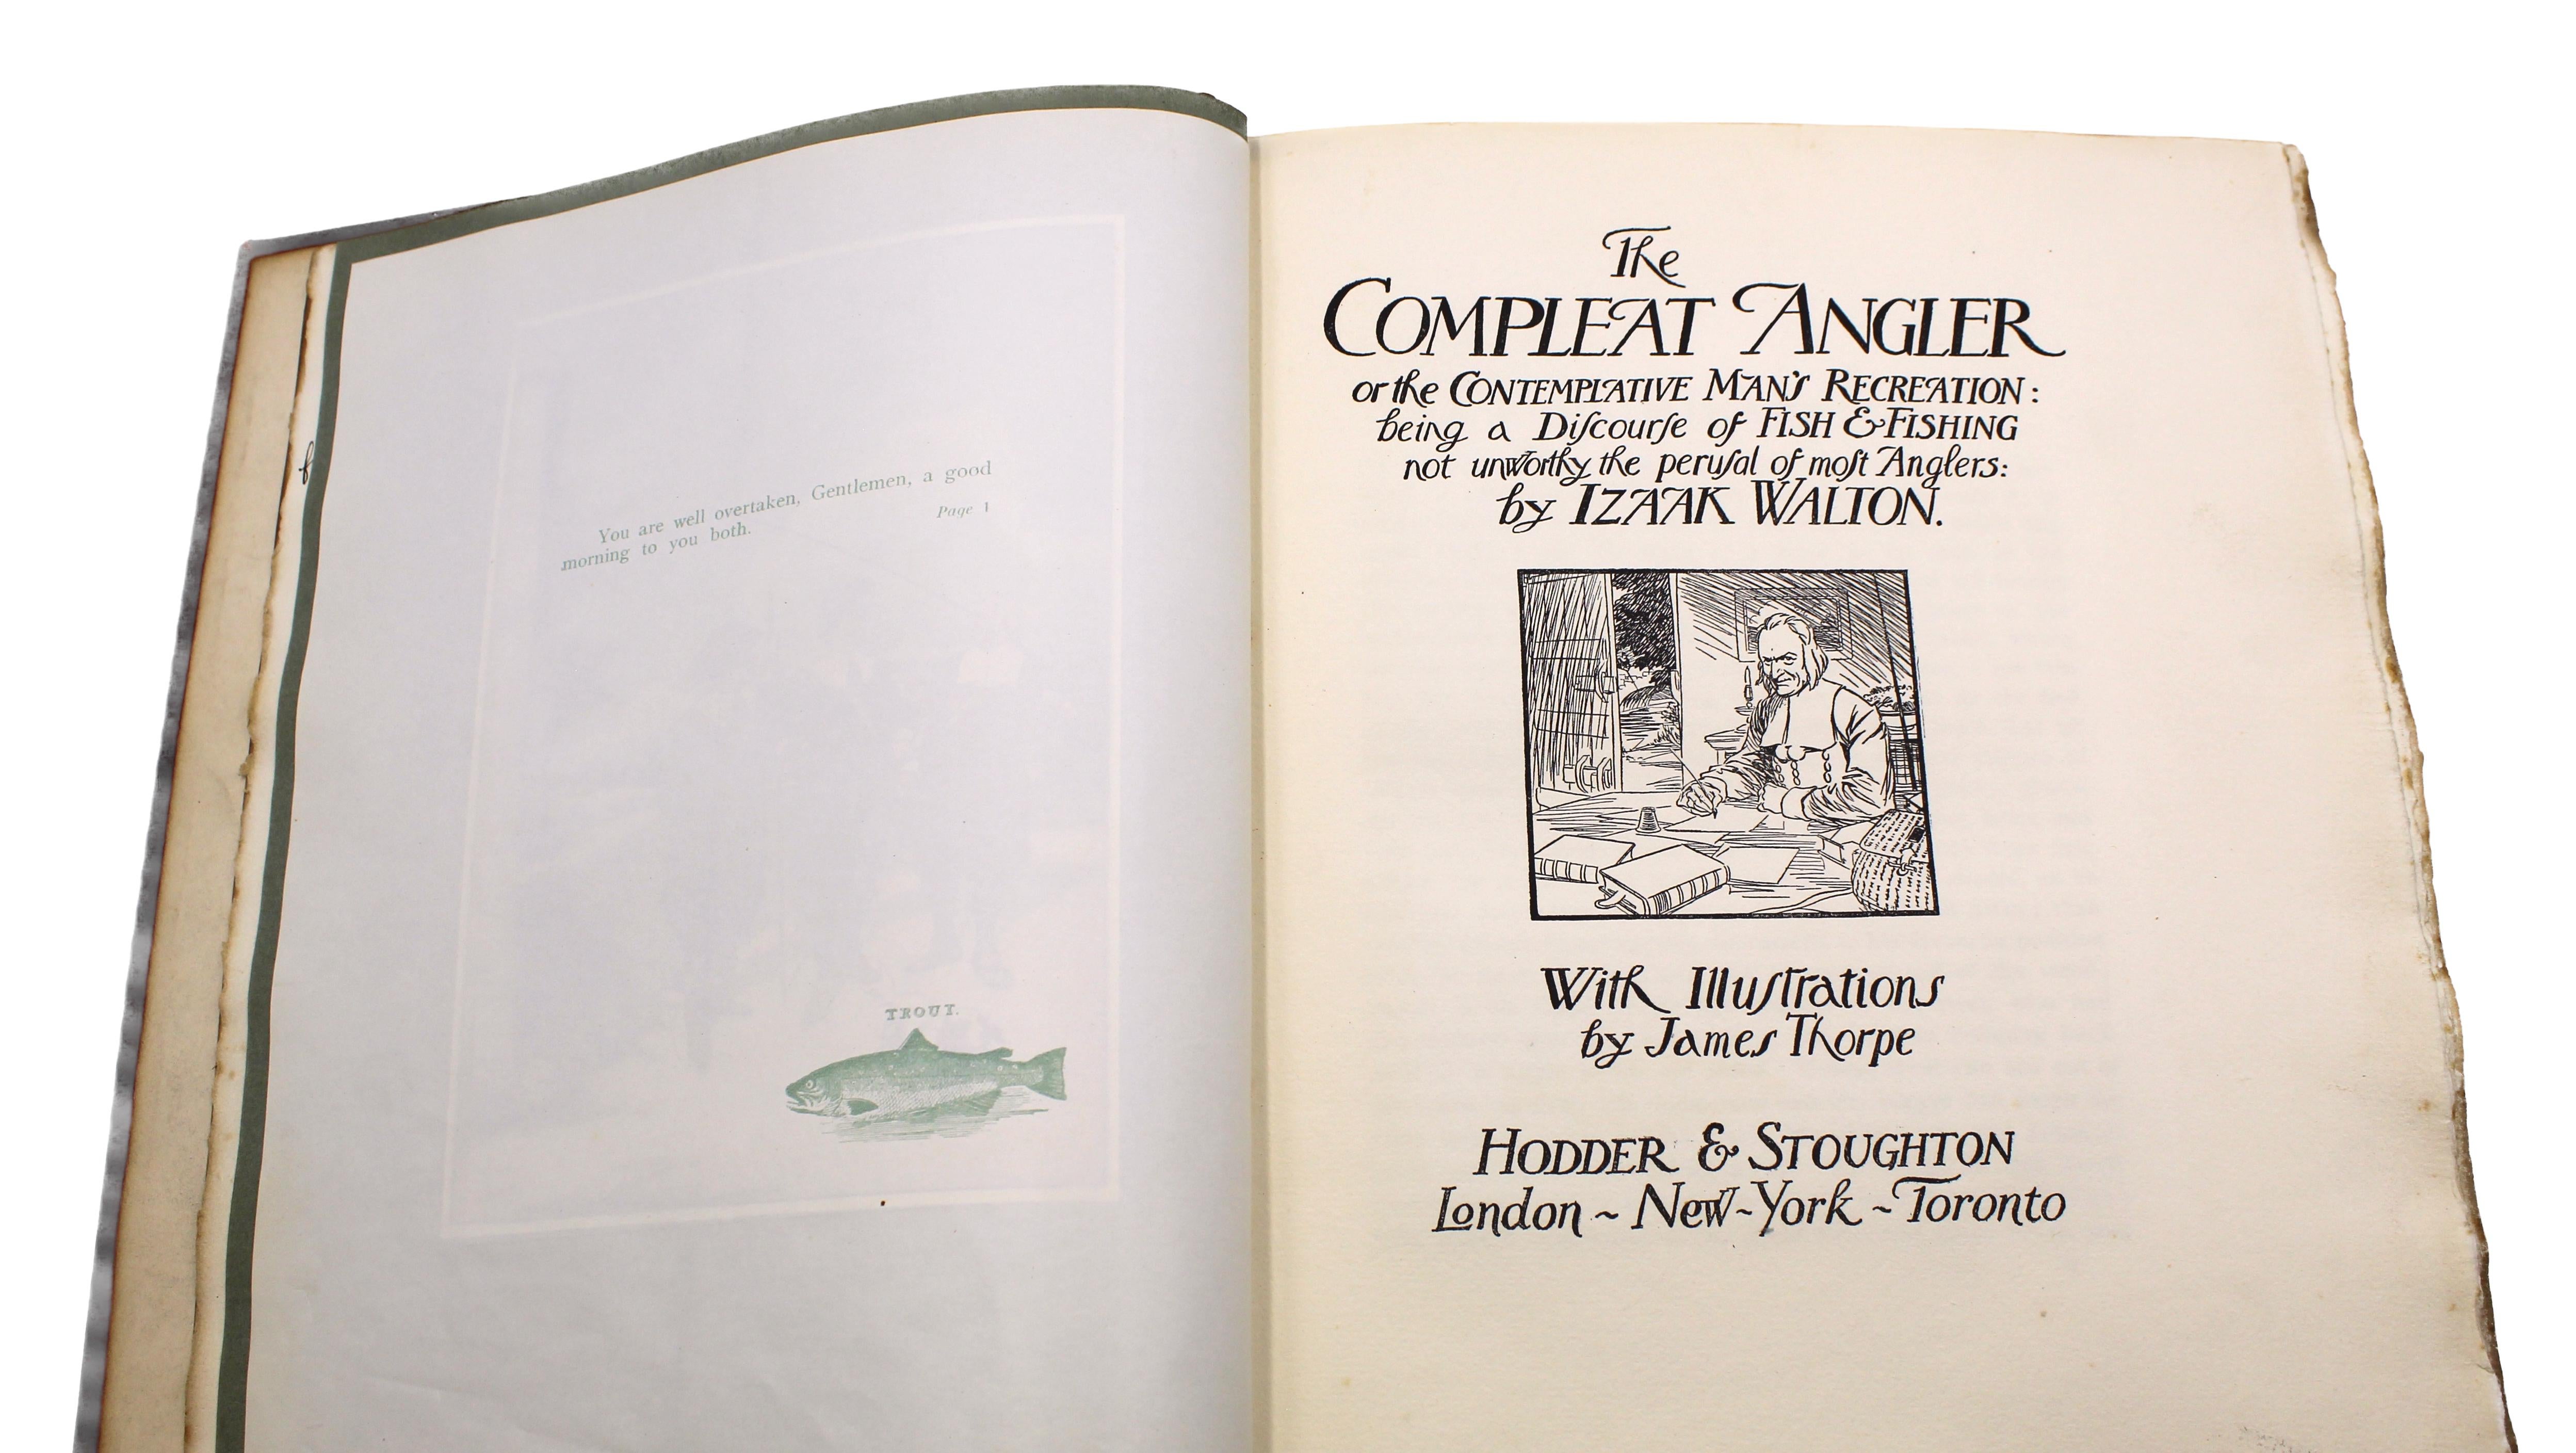 English The Compleat Angler by Izaak Walton, Illustrated and Signed by J. Thorpe, 1911